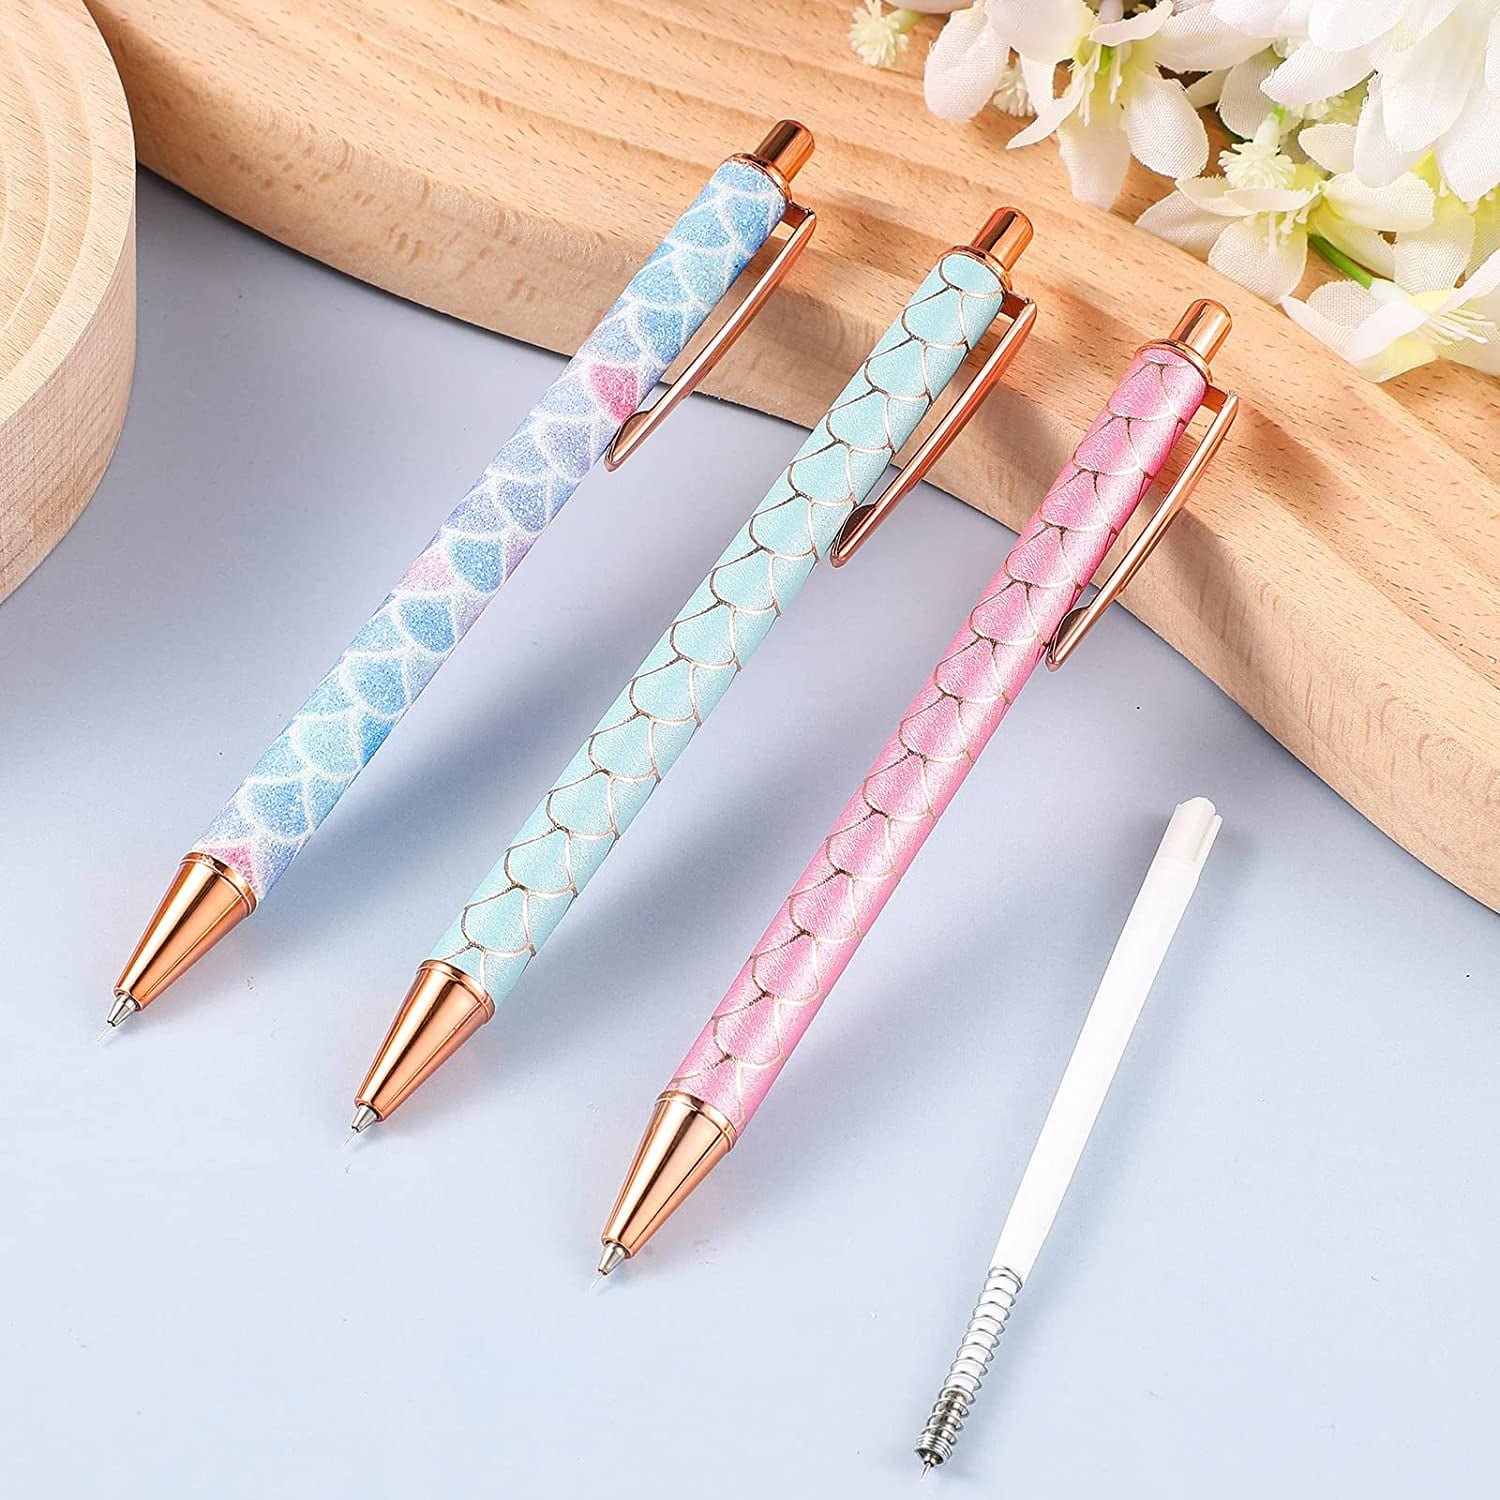 2 Pieces Weeding Pen Vinyl Pen Pin Weeding Tool Fine Point Weeding Tool Glitter Metal Vinyl Air Release or Car Puncturing Installation Retractable CR